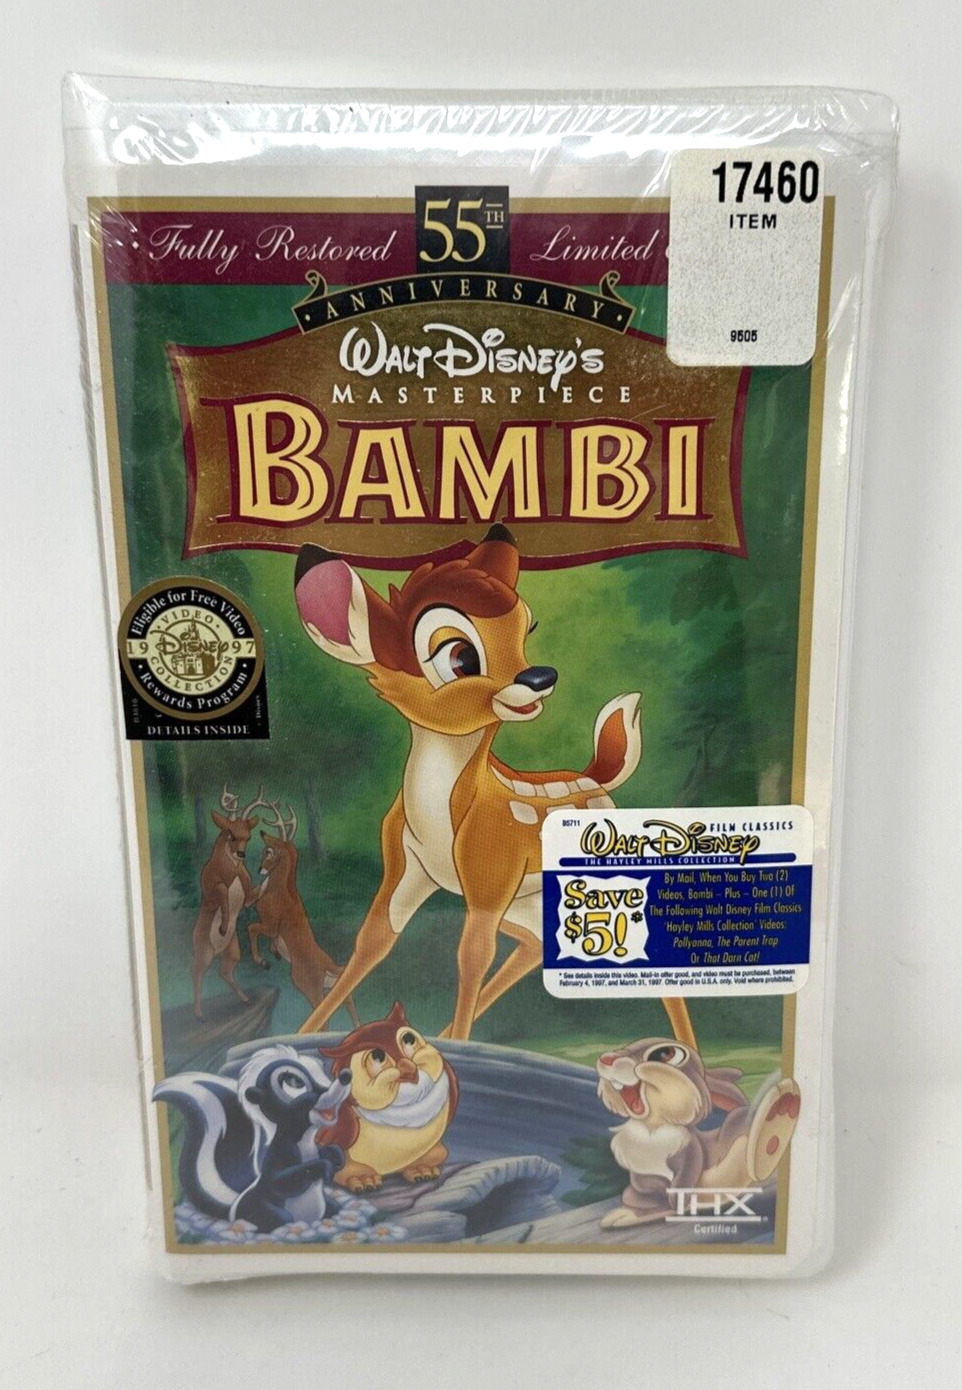 Bambi VHS 55th Anniversary Brand New Sealed Fully Restored Limited Edition